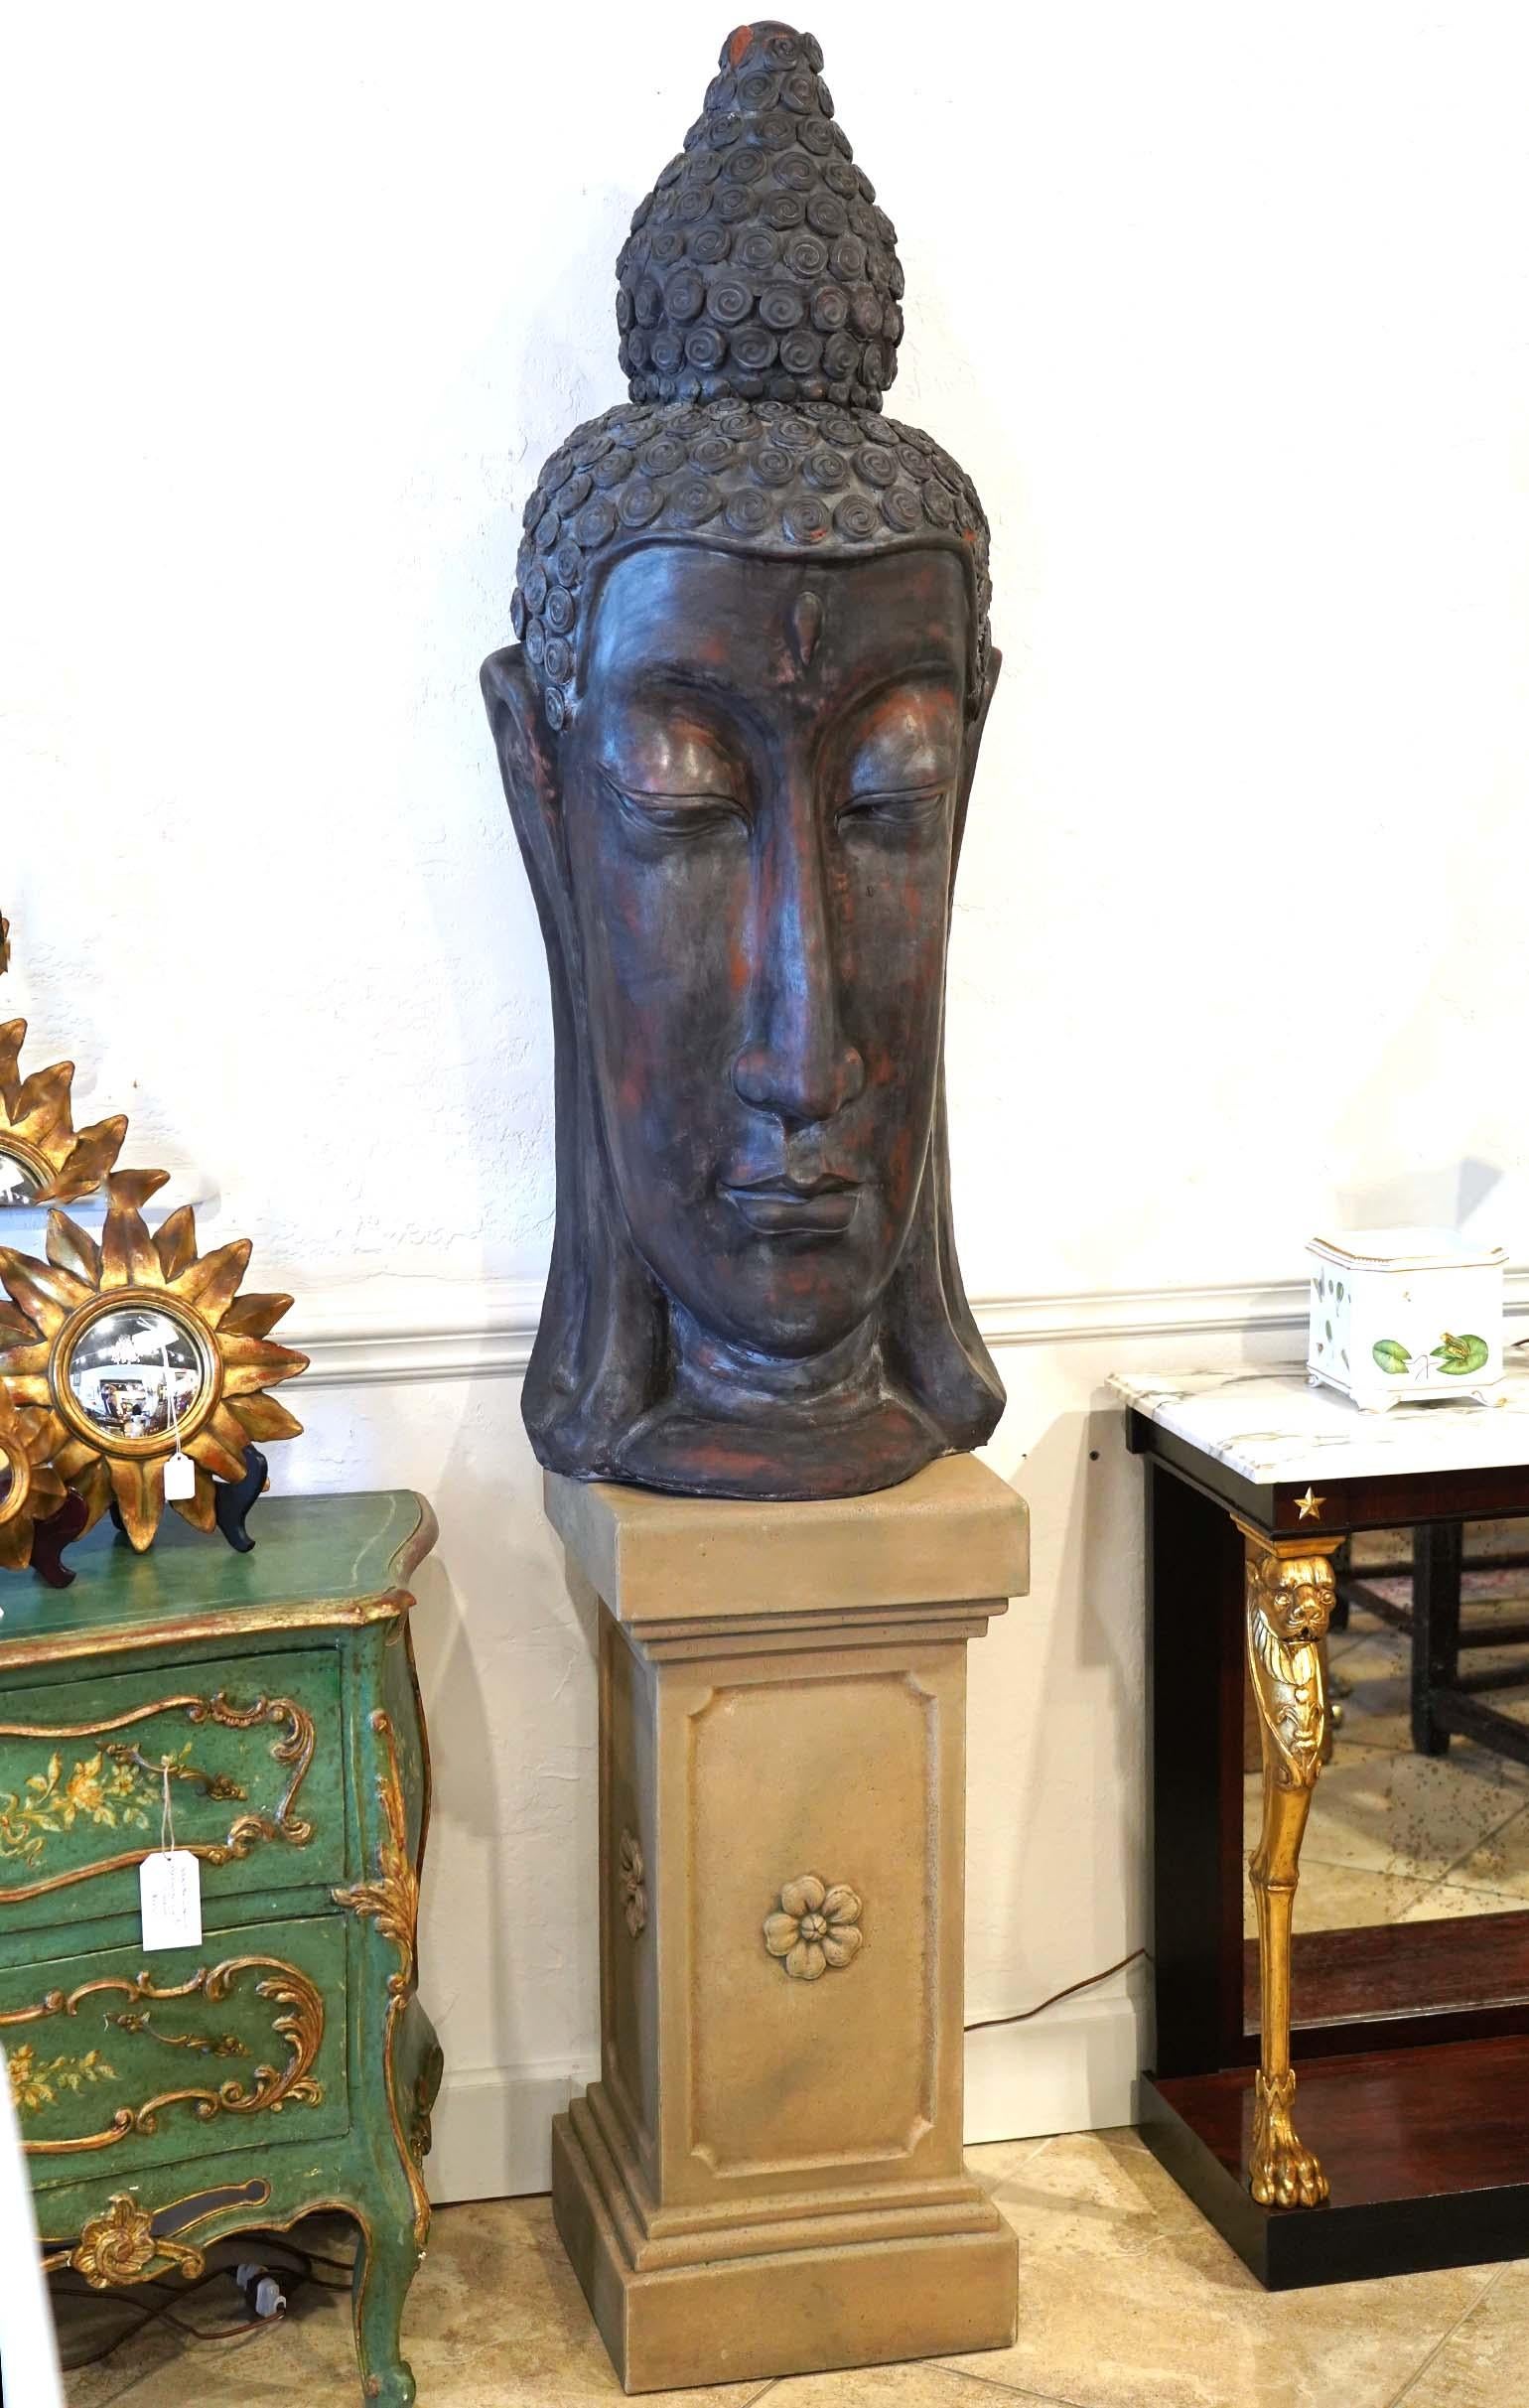 Standing 52 inches tall this Buddha will look very impressive both outdoors and indoors environment. It likely dates to the late 20th century and is created for decorative purposes. The facial details are elegant and well sculpted. The traditional